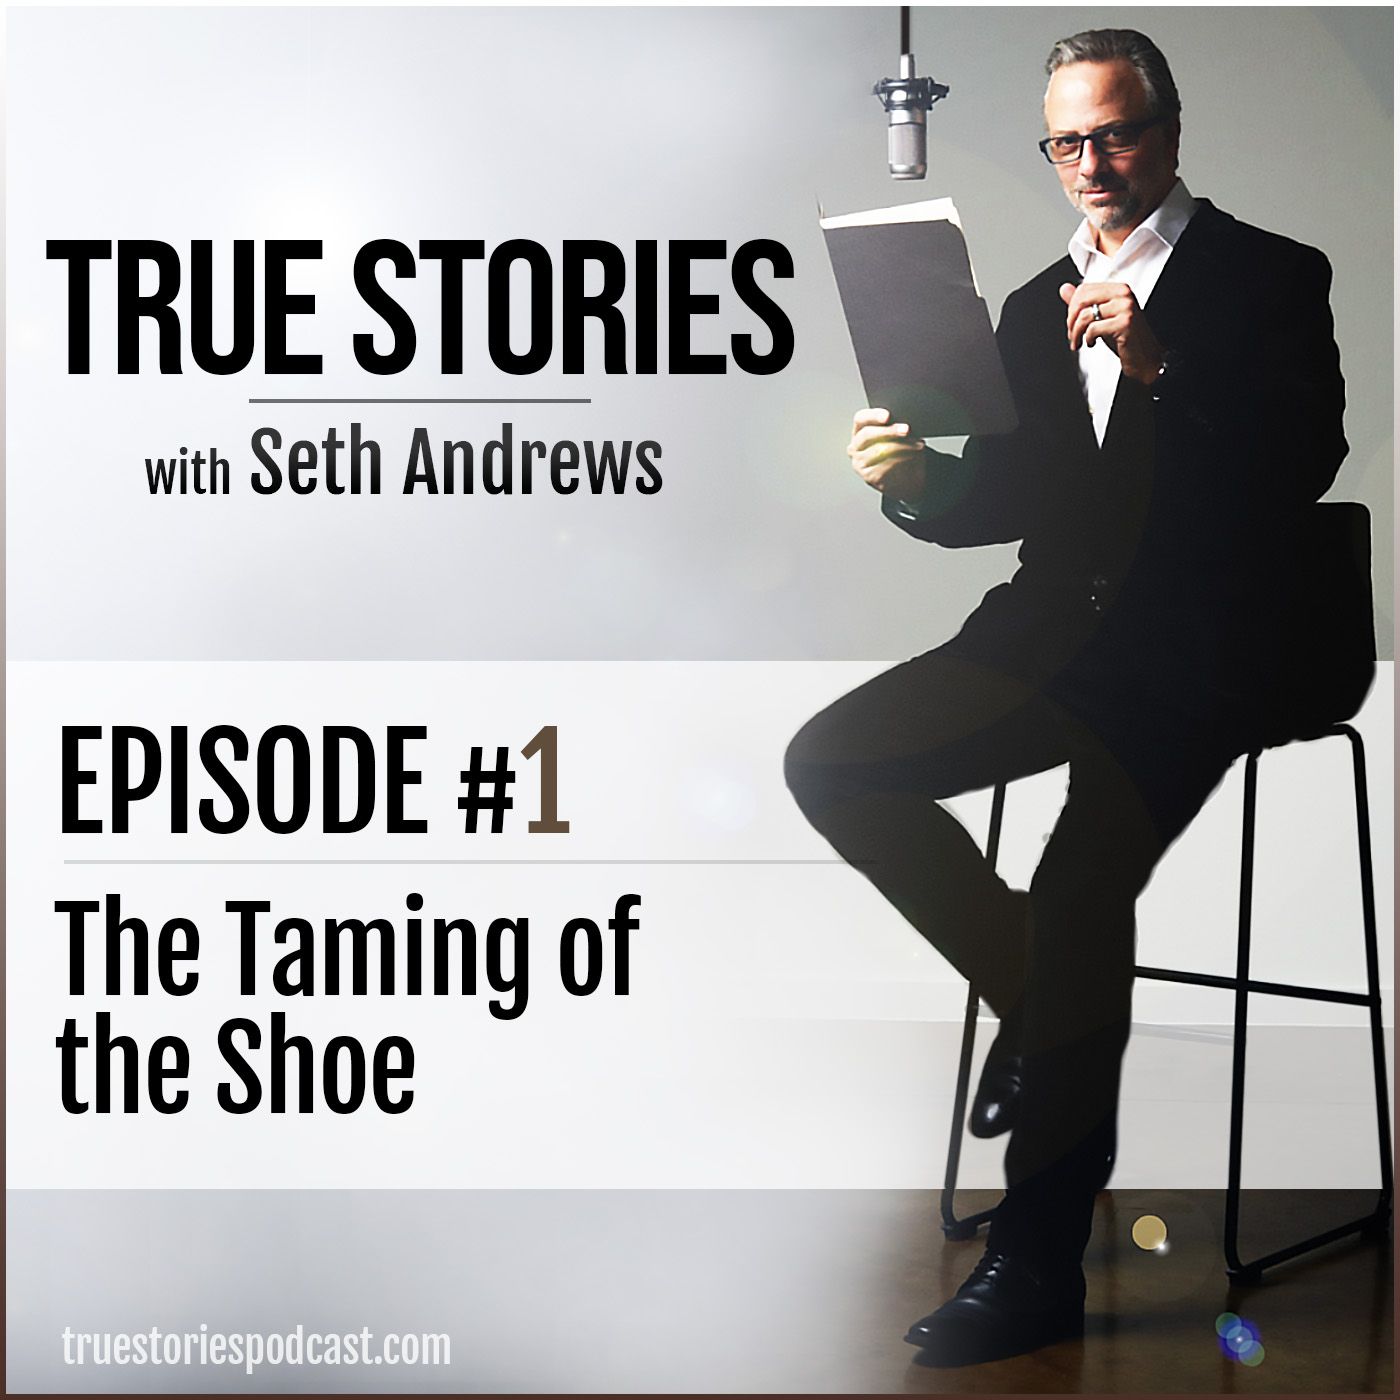 True Stories #1 - The Taming of the Shoe